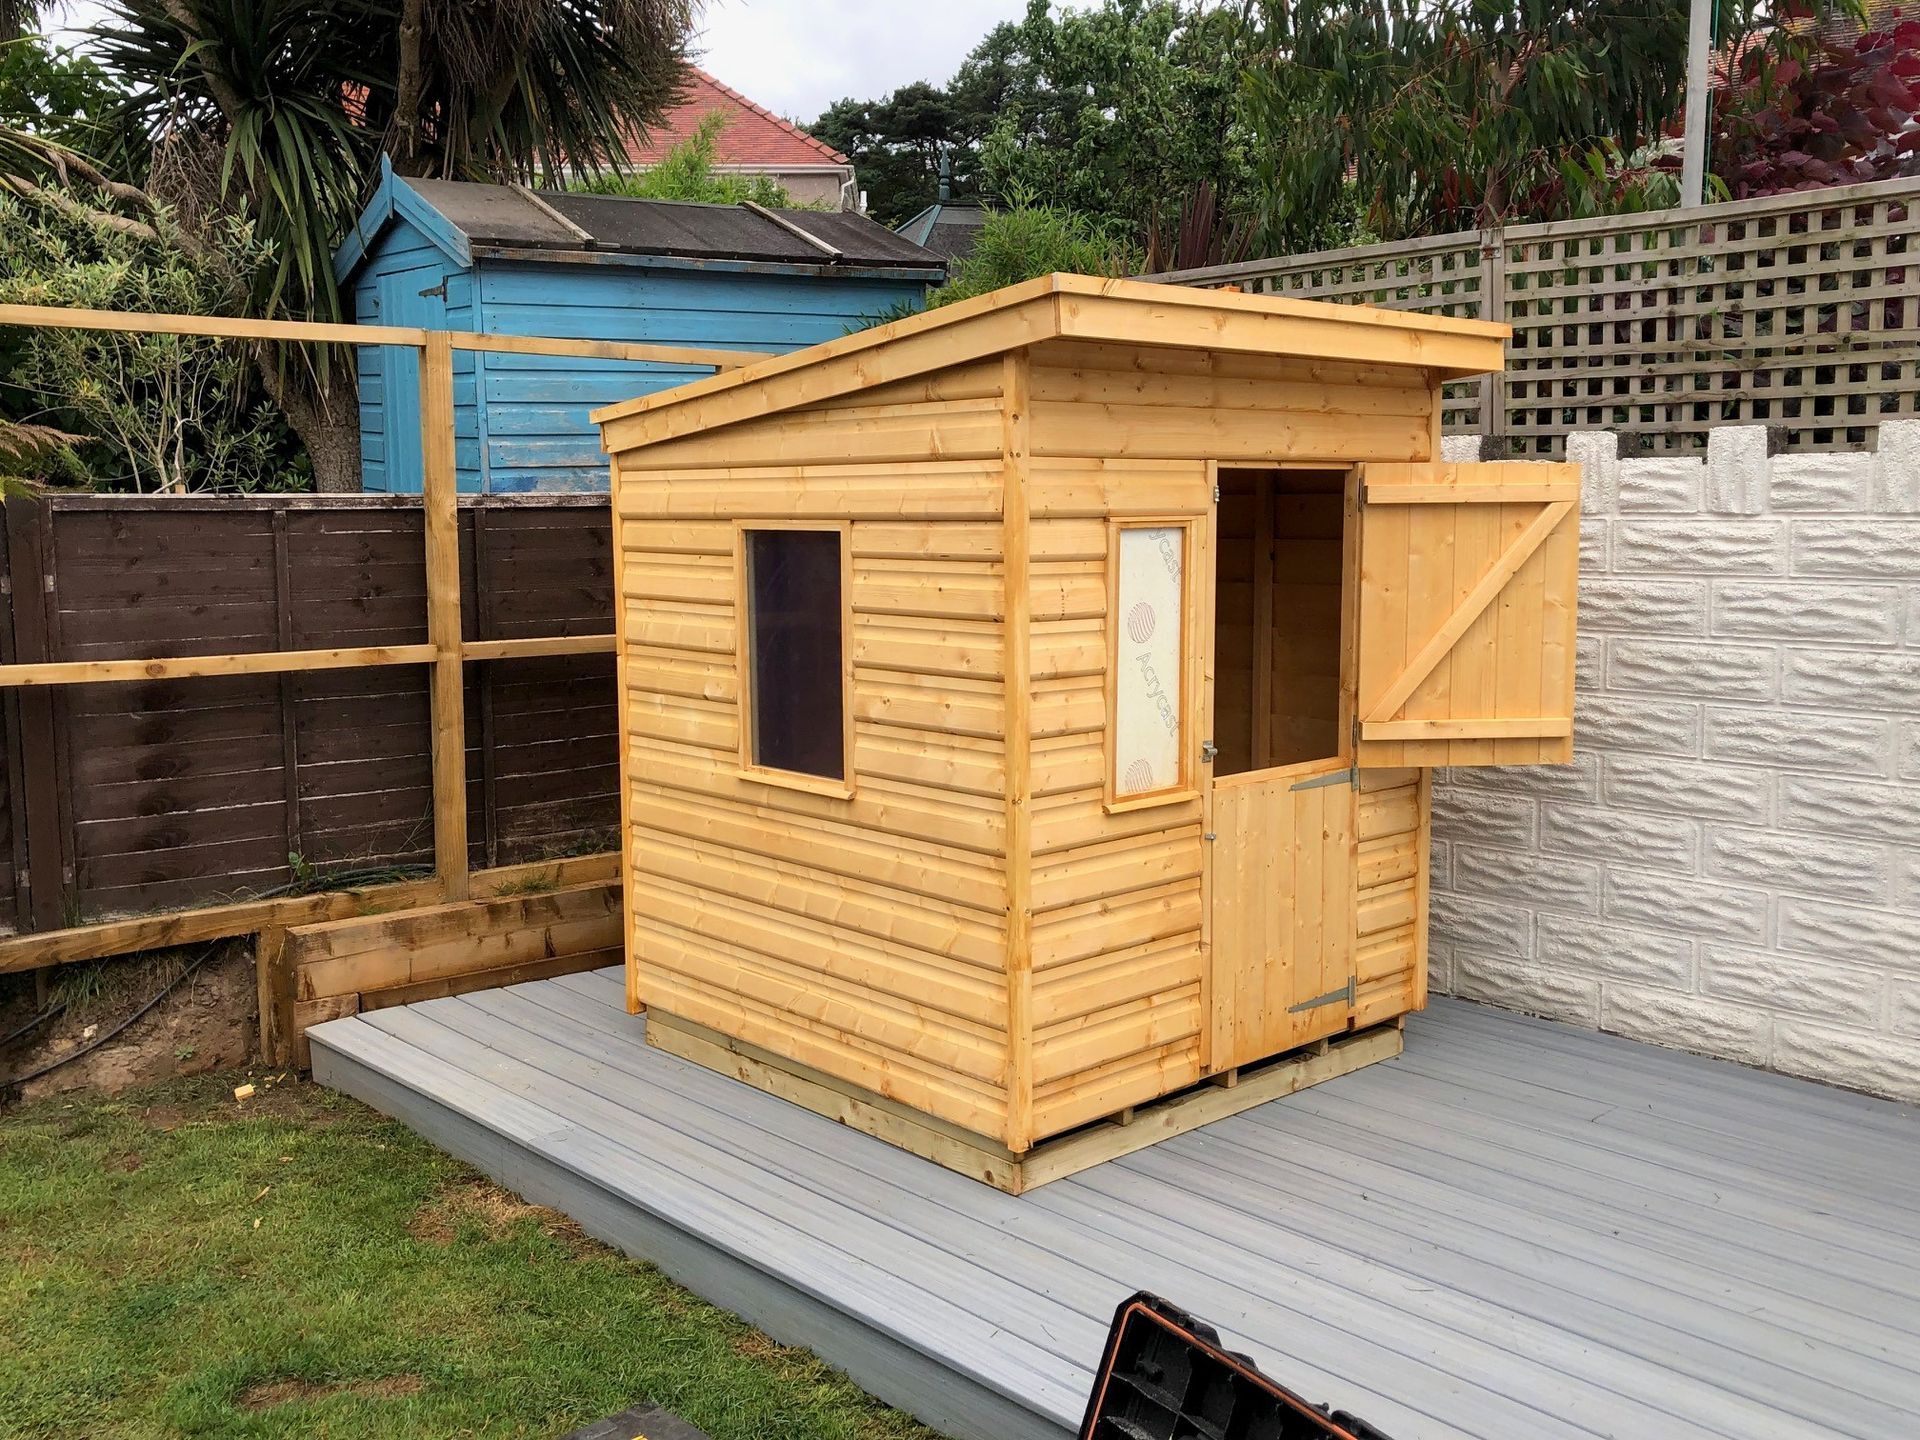 5' x 5' Pent shed with stable door to the right and single window to the left and window on the left wall.